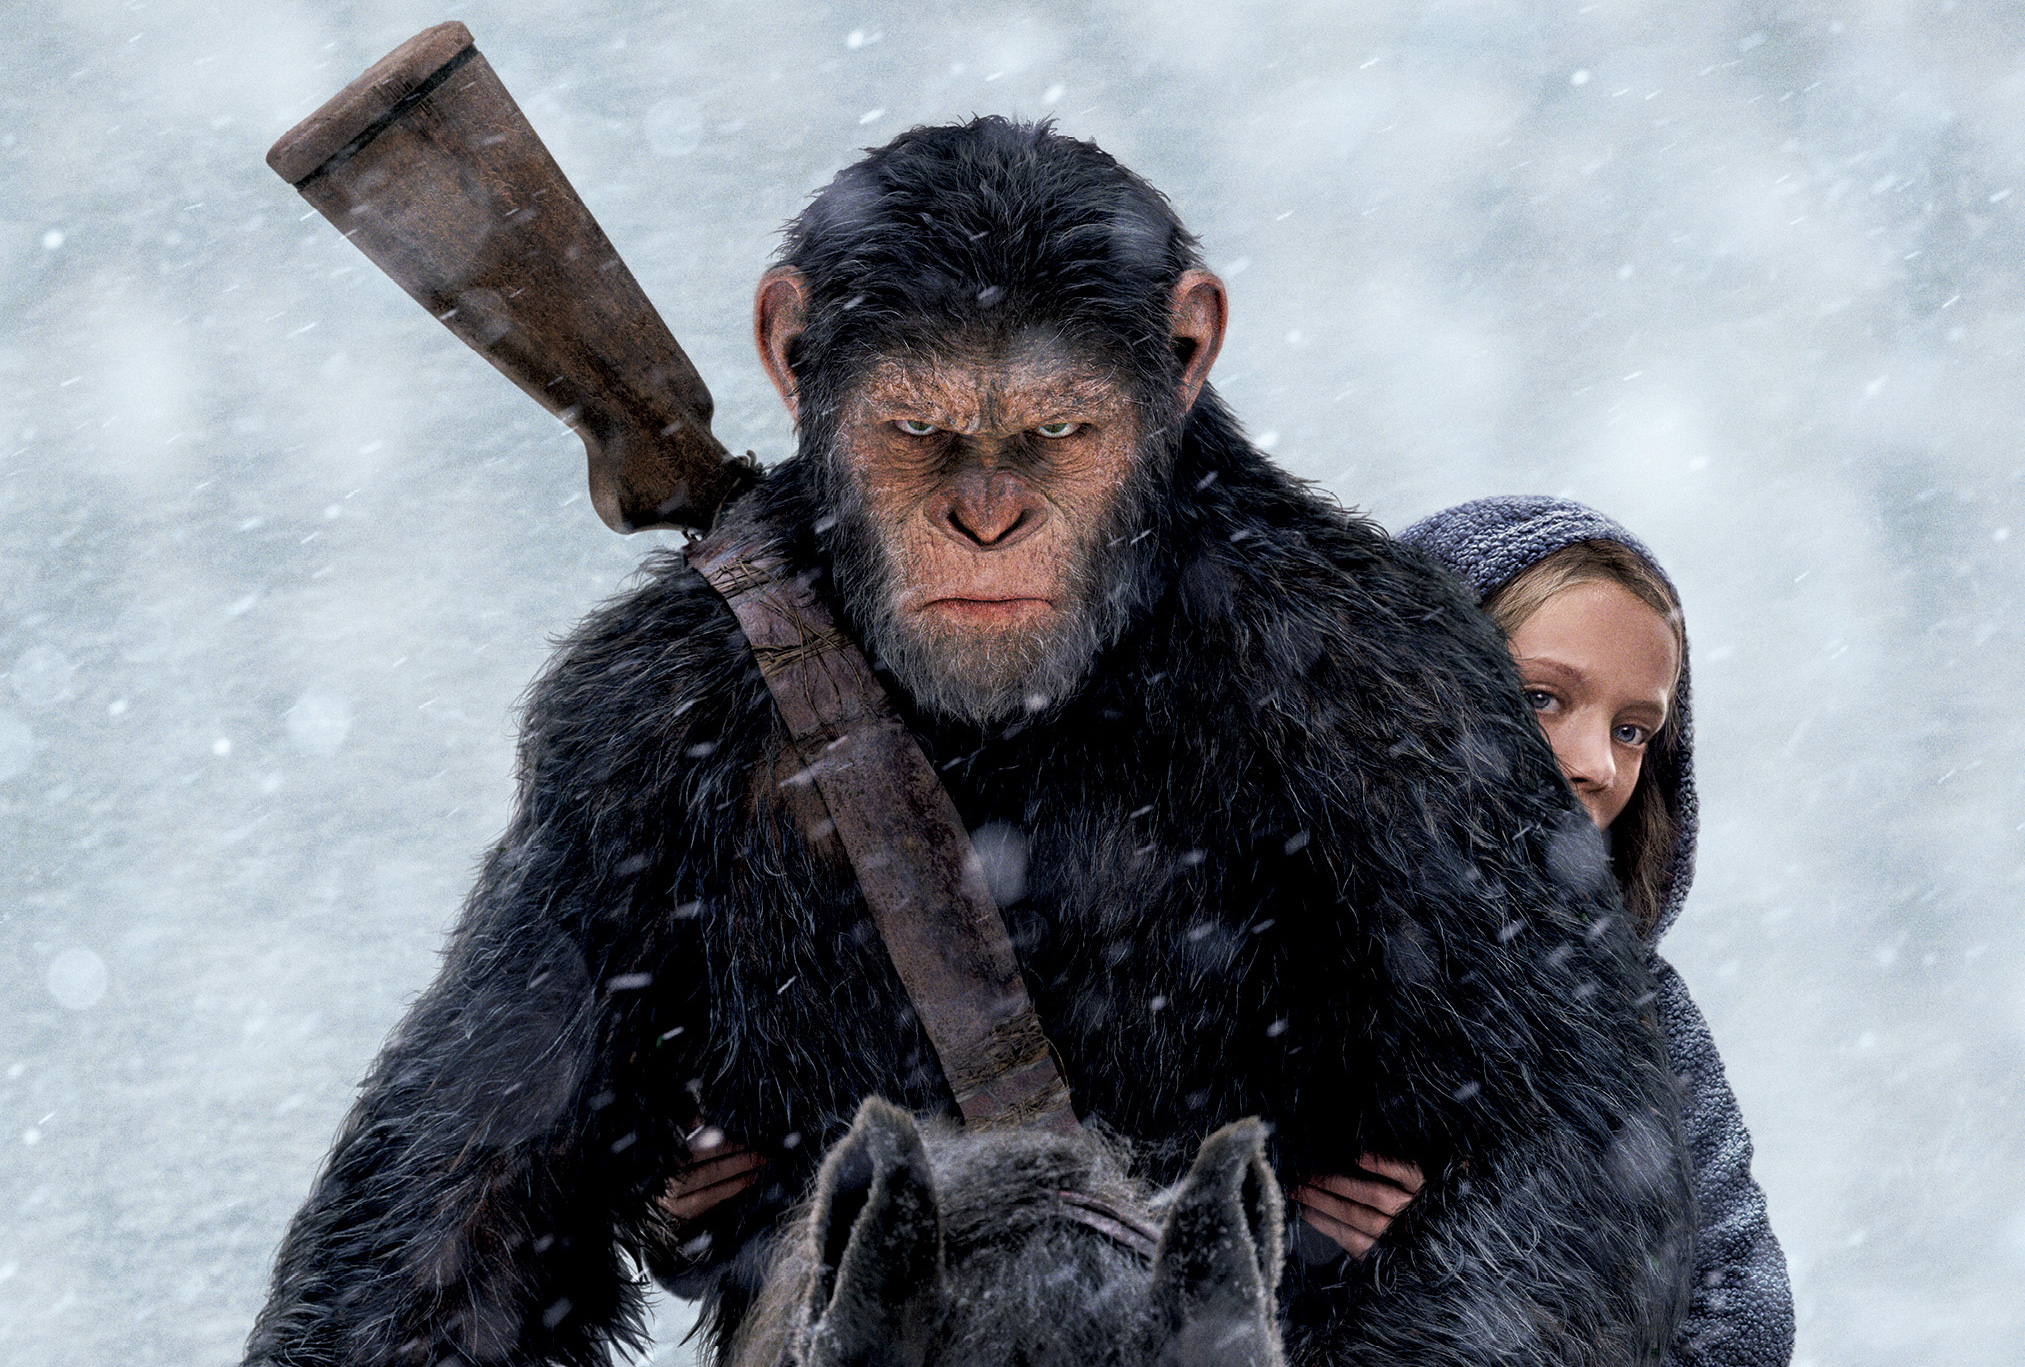 war for the planet of the apes wallpaper,common chimpanzee,primate,macaque,human,fur